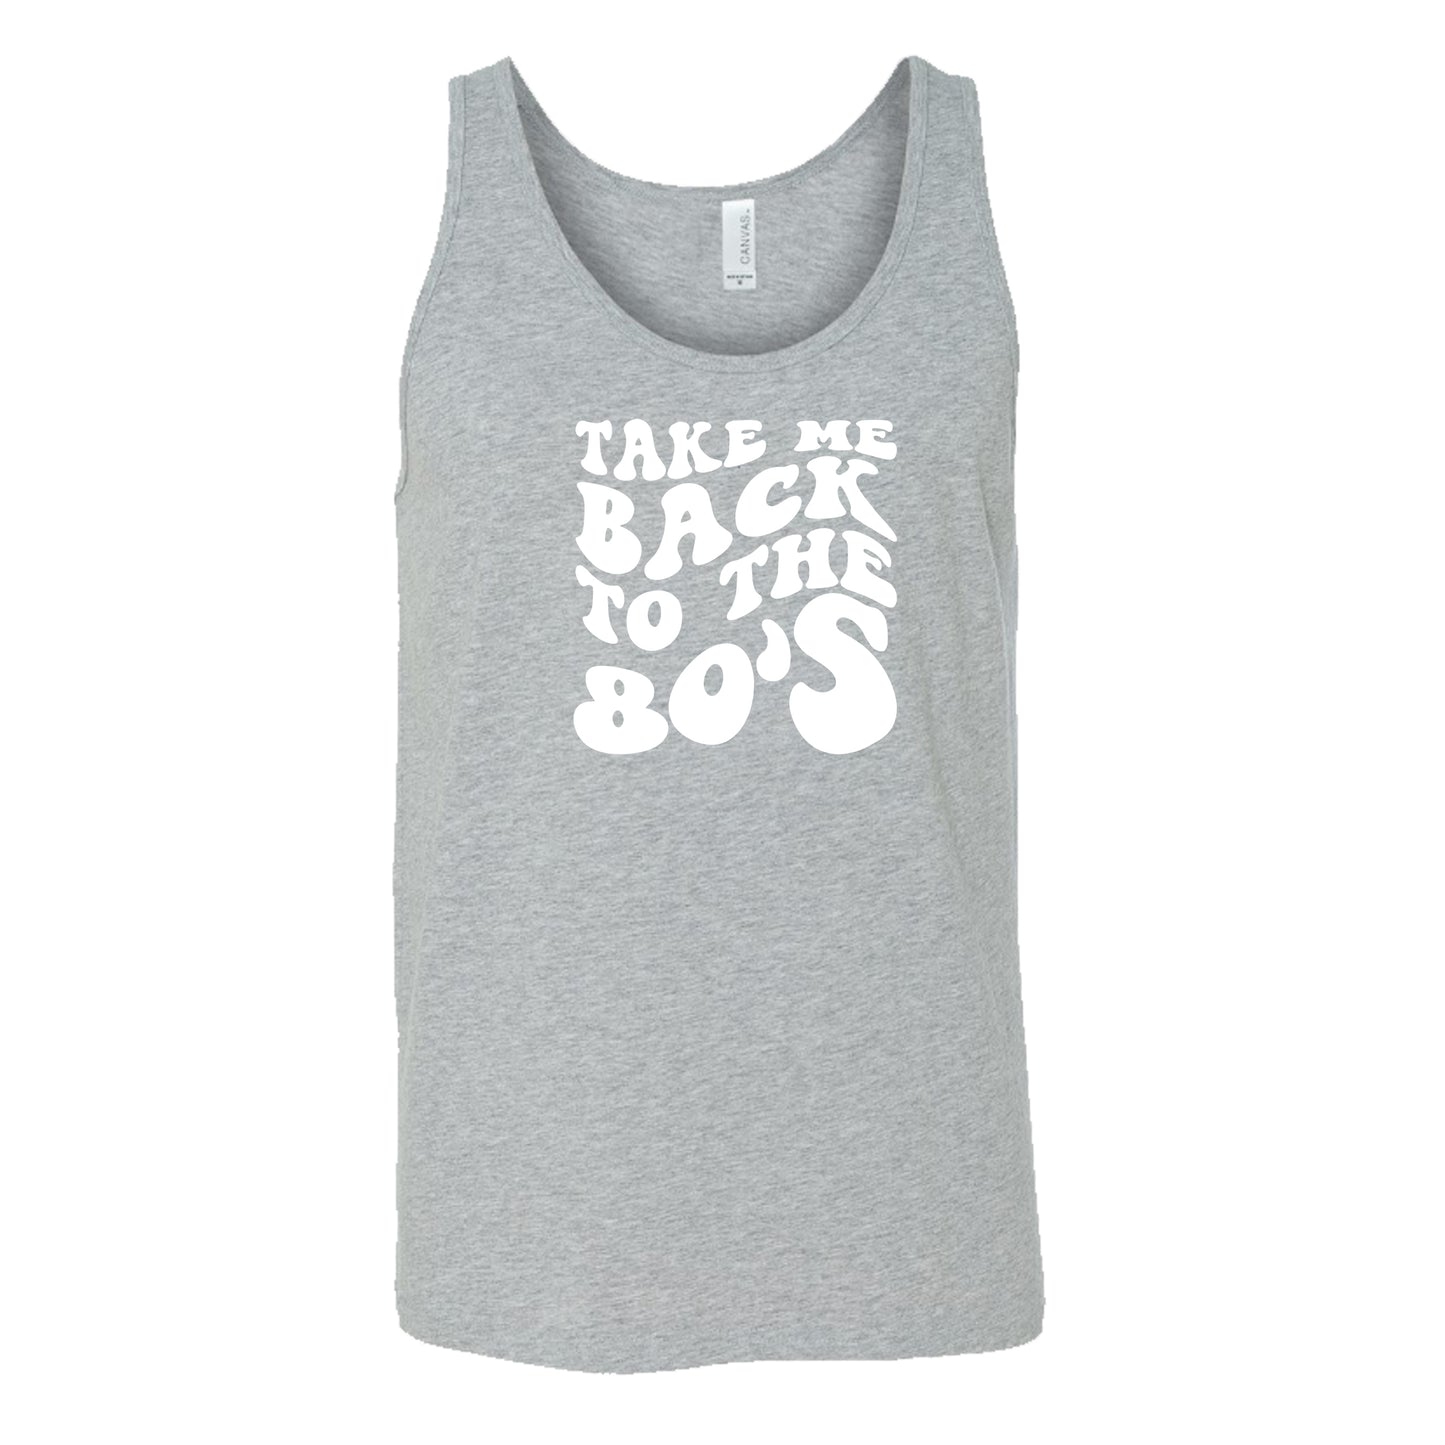 Take Me Back To The 80's Shirt Unisex